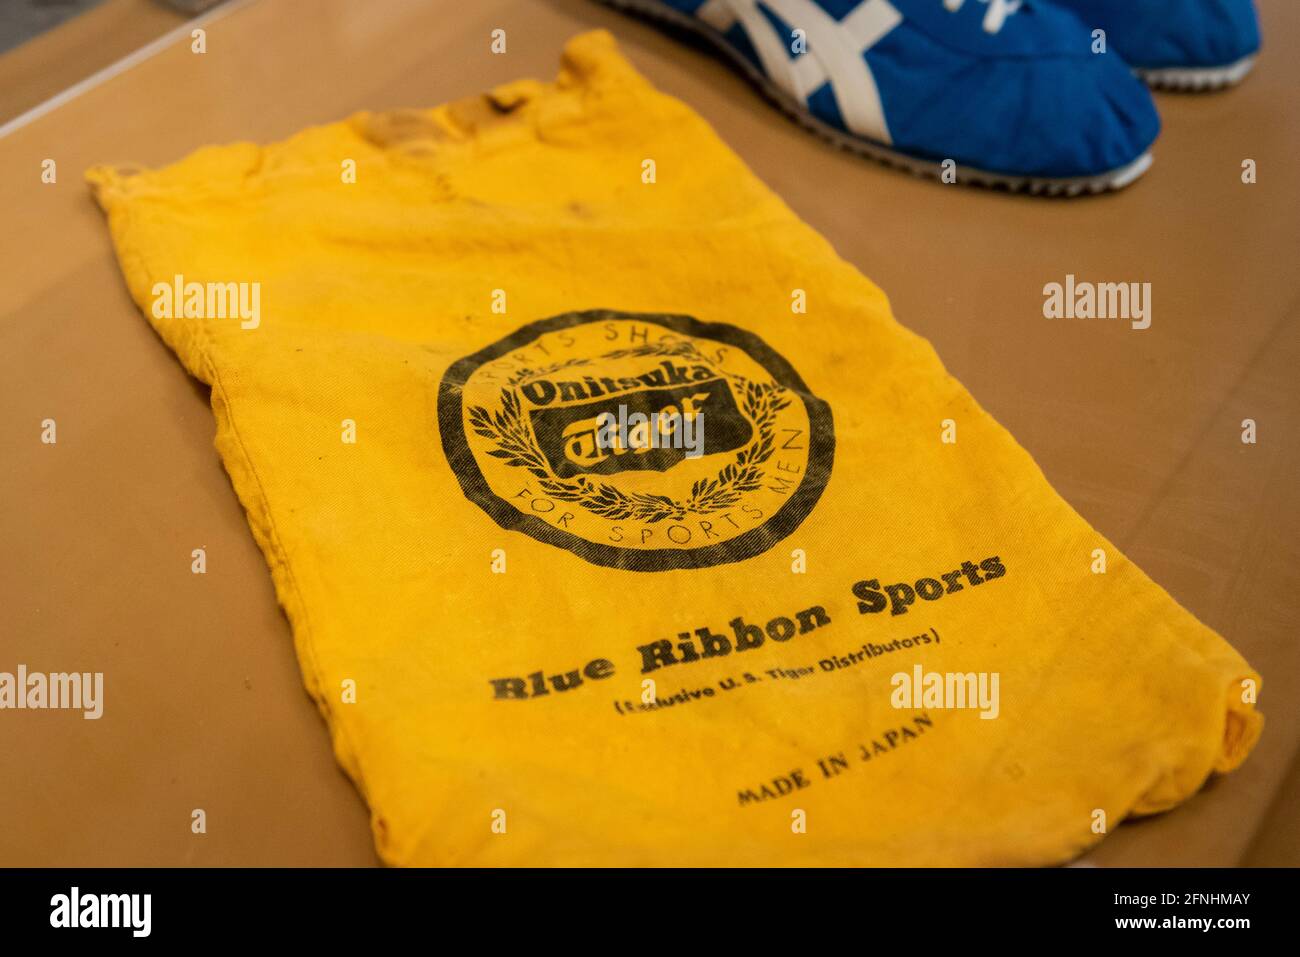 London, UK. 17 May 2021. Onitsuka Tiger shoe bag. Phil Knight and Bill  Bowerman, through Blue Ribbon Sports, distributed Onitsuka Tiger in the US.  When the deal ended, Blue Ribbon Sports became